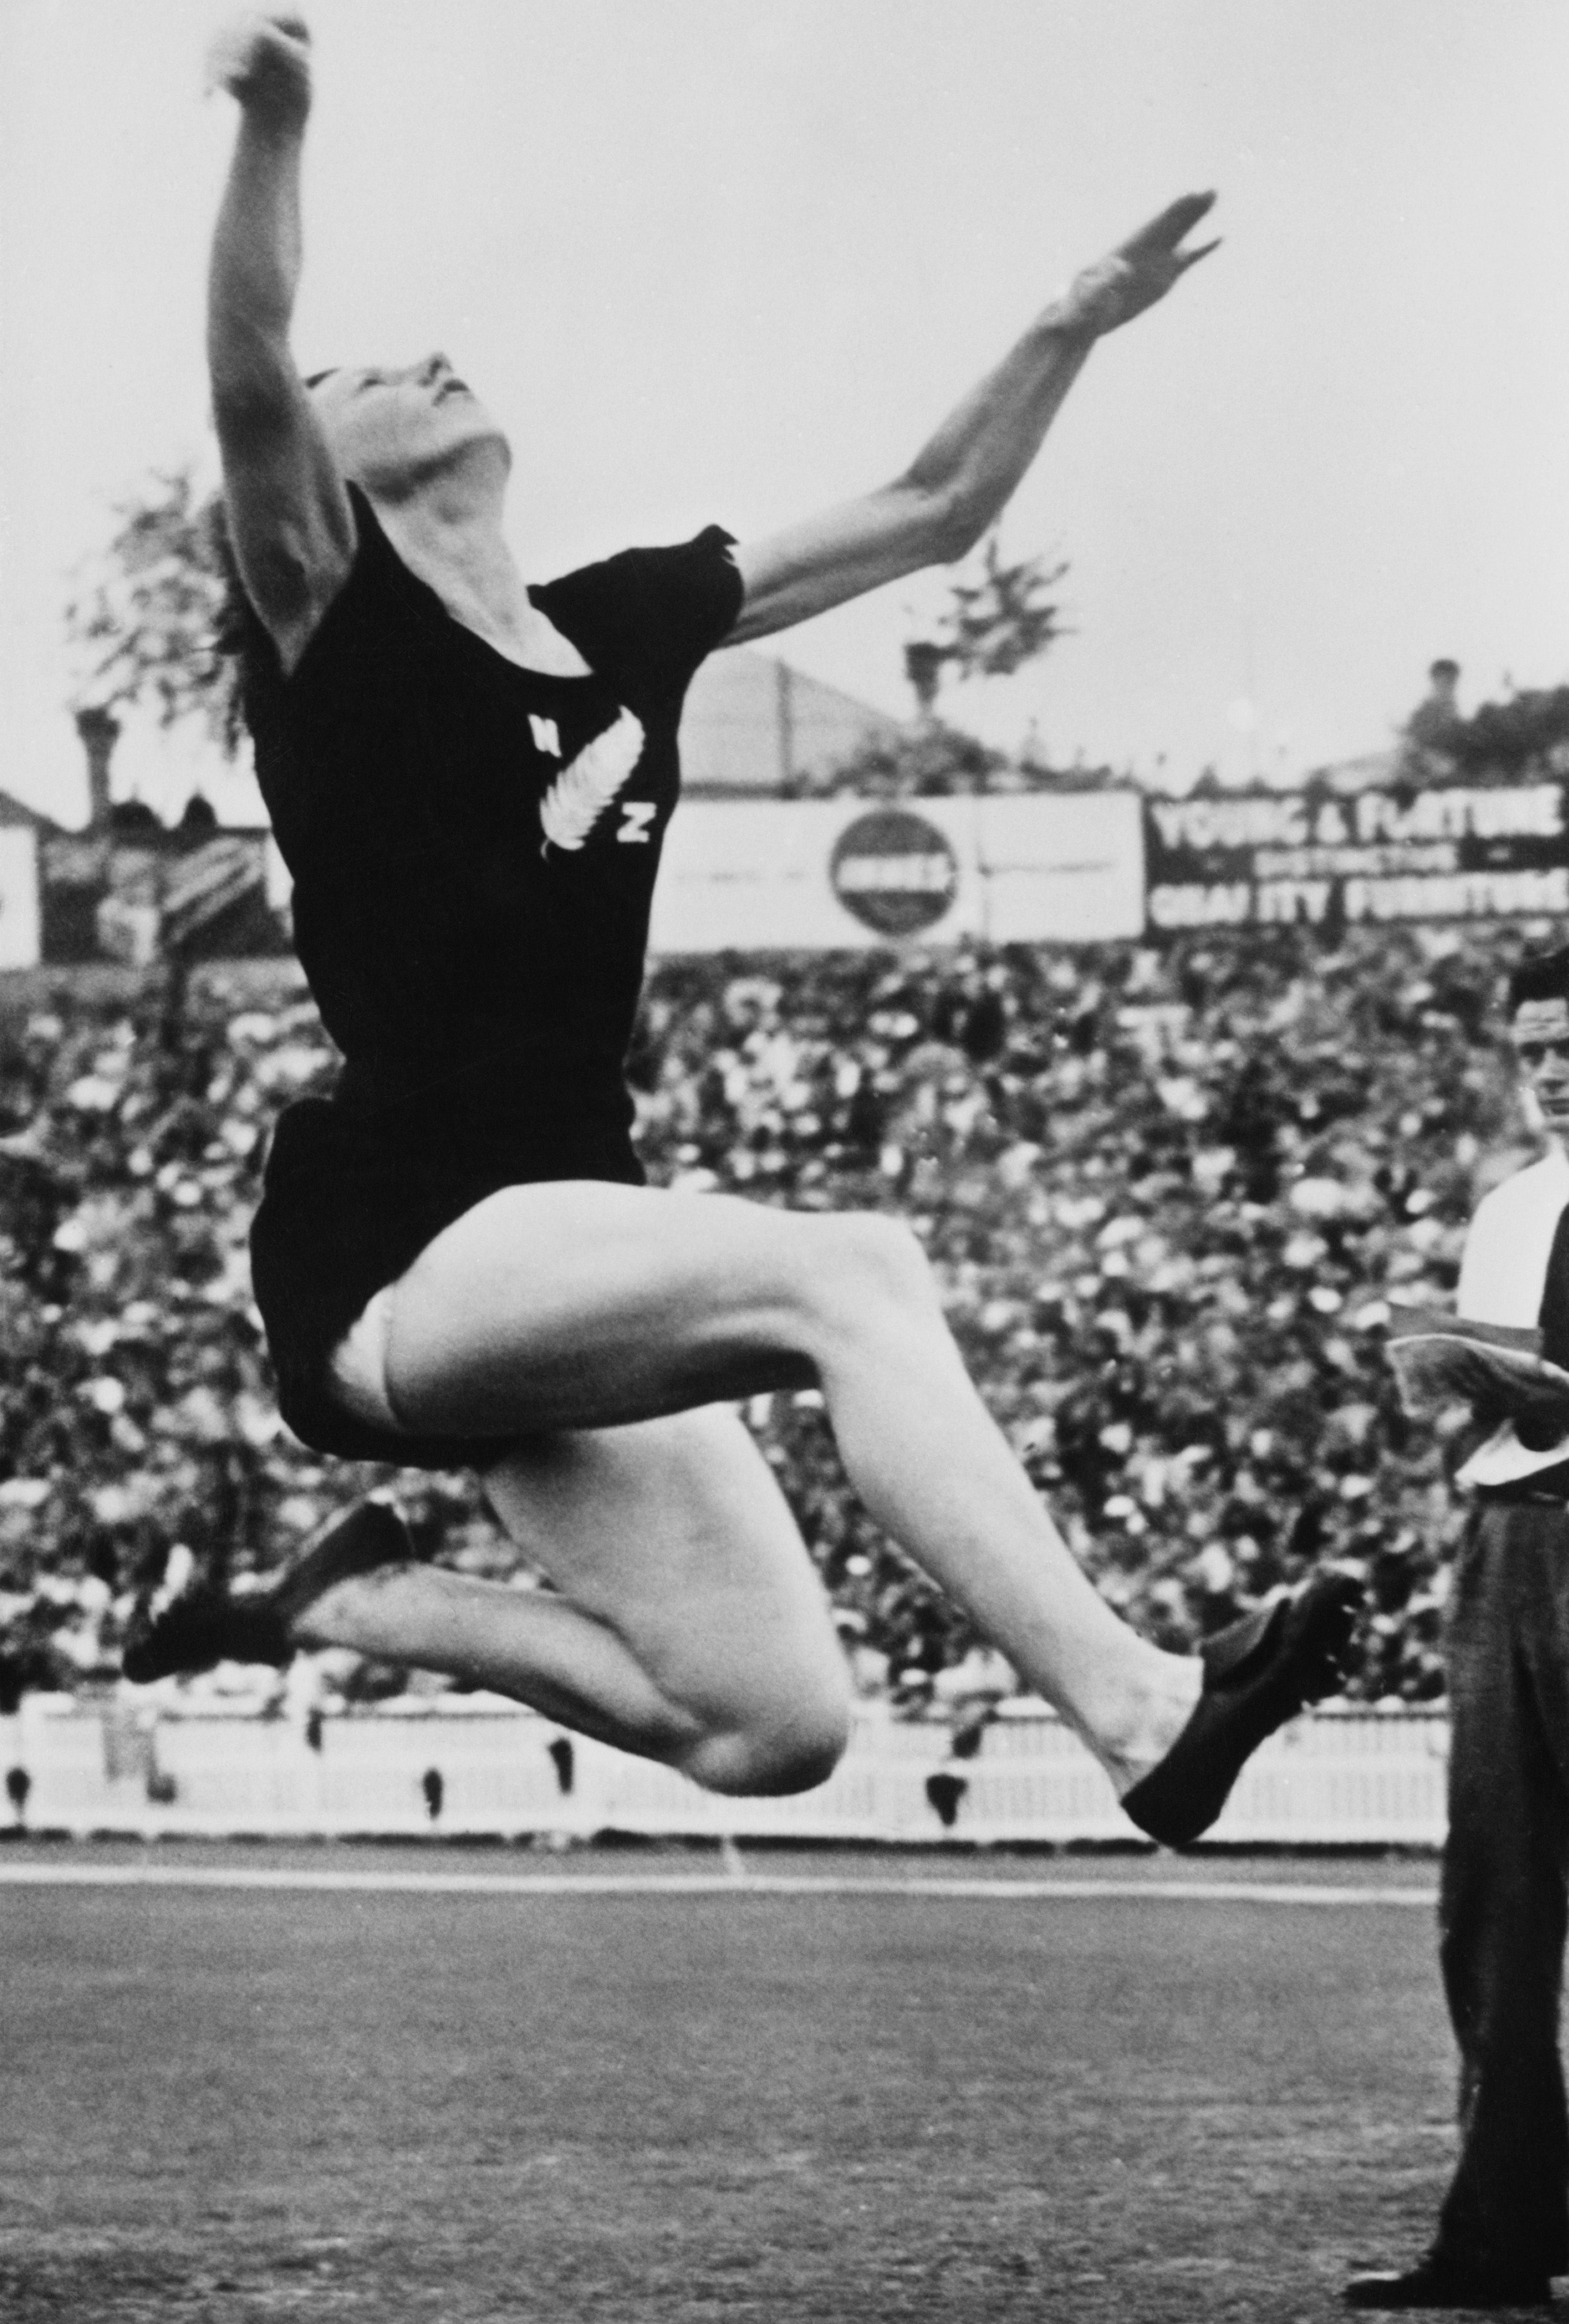 Yvette Williams wins the long jump in Auckland in 1950